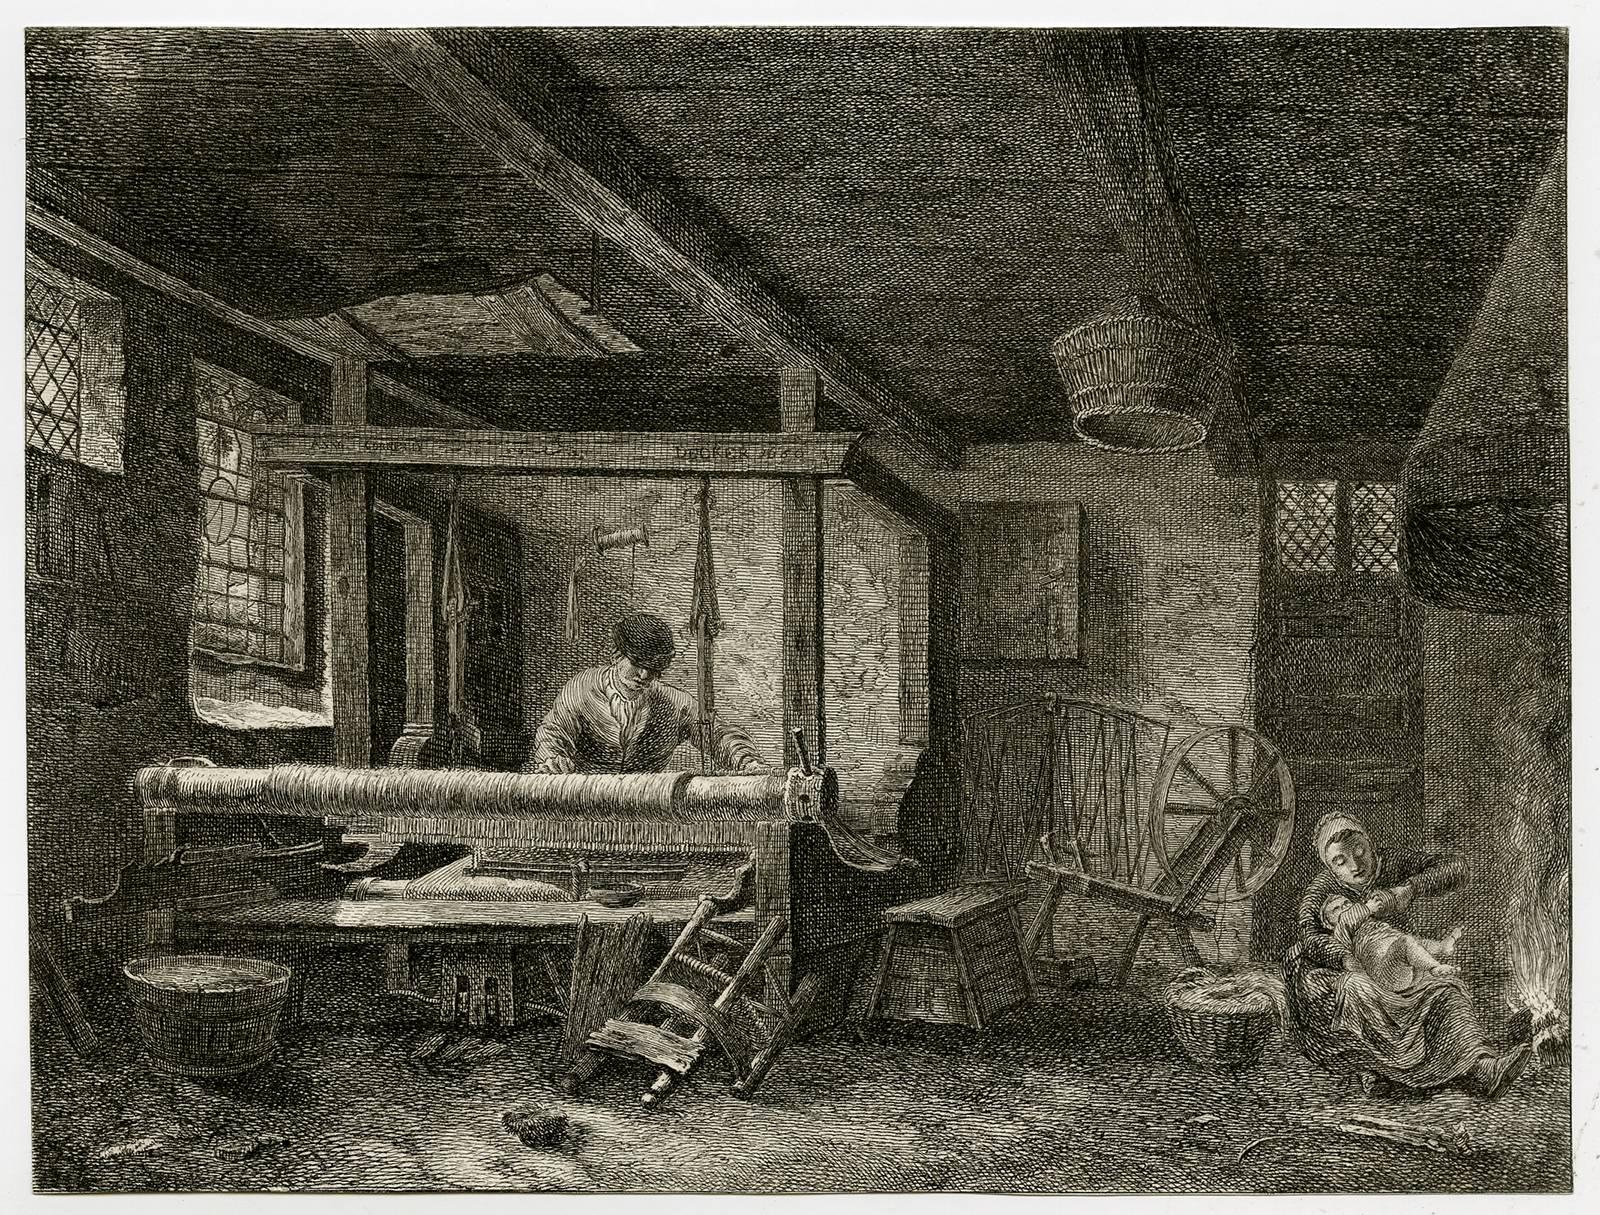 Unknown Figurative Print - Untitled - An interior of a house with a man working at a loom.